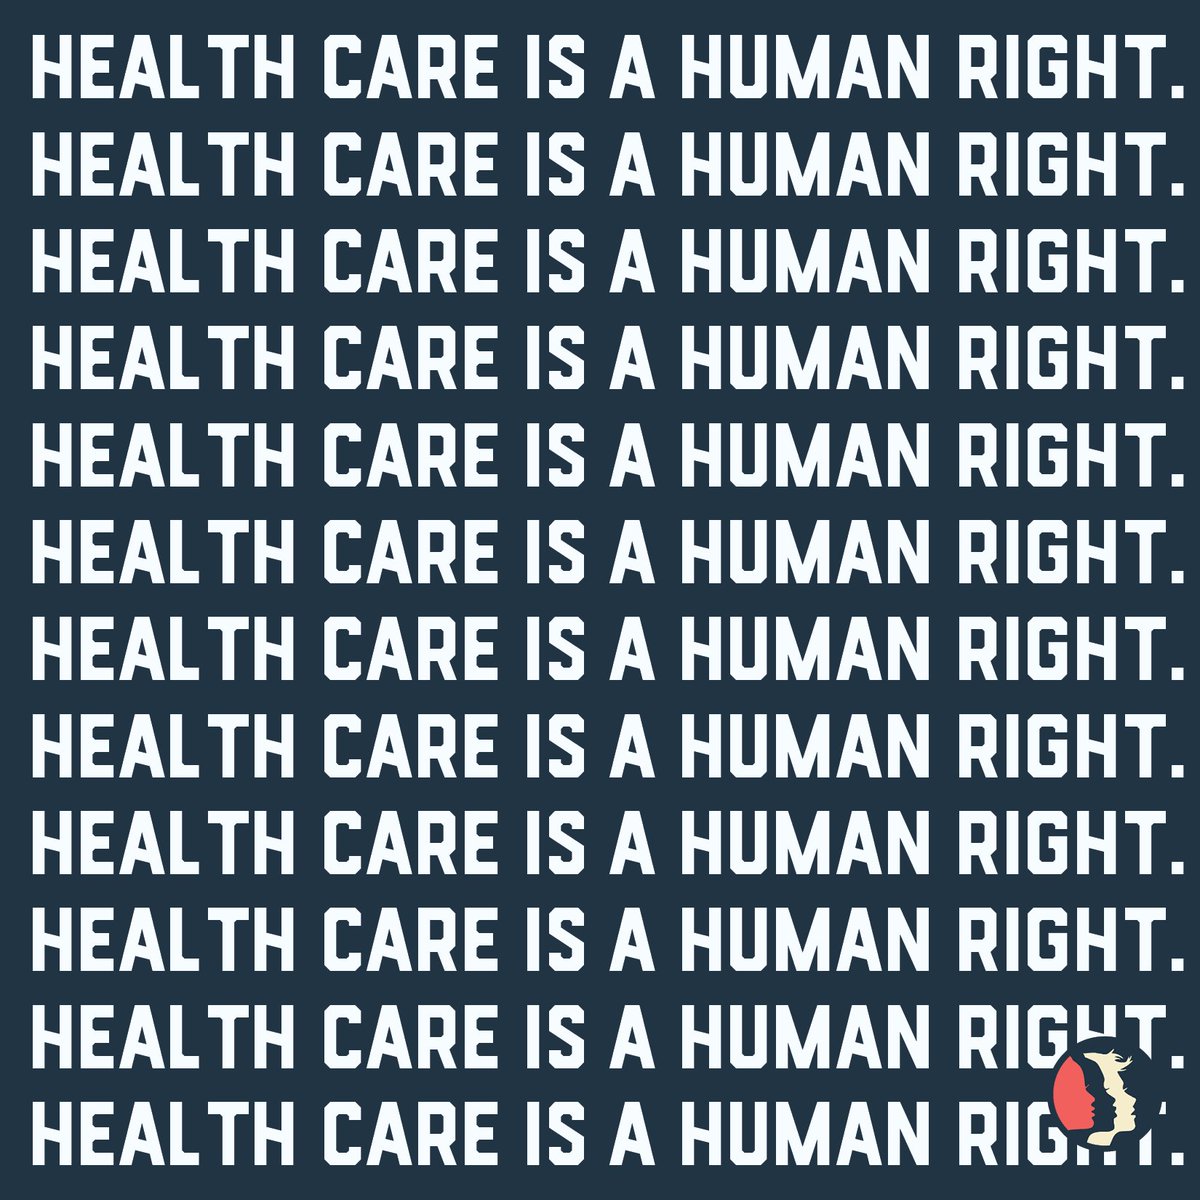 A blue background with white text. Written 12 times going down vertically is the sentence "health care is a human right".